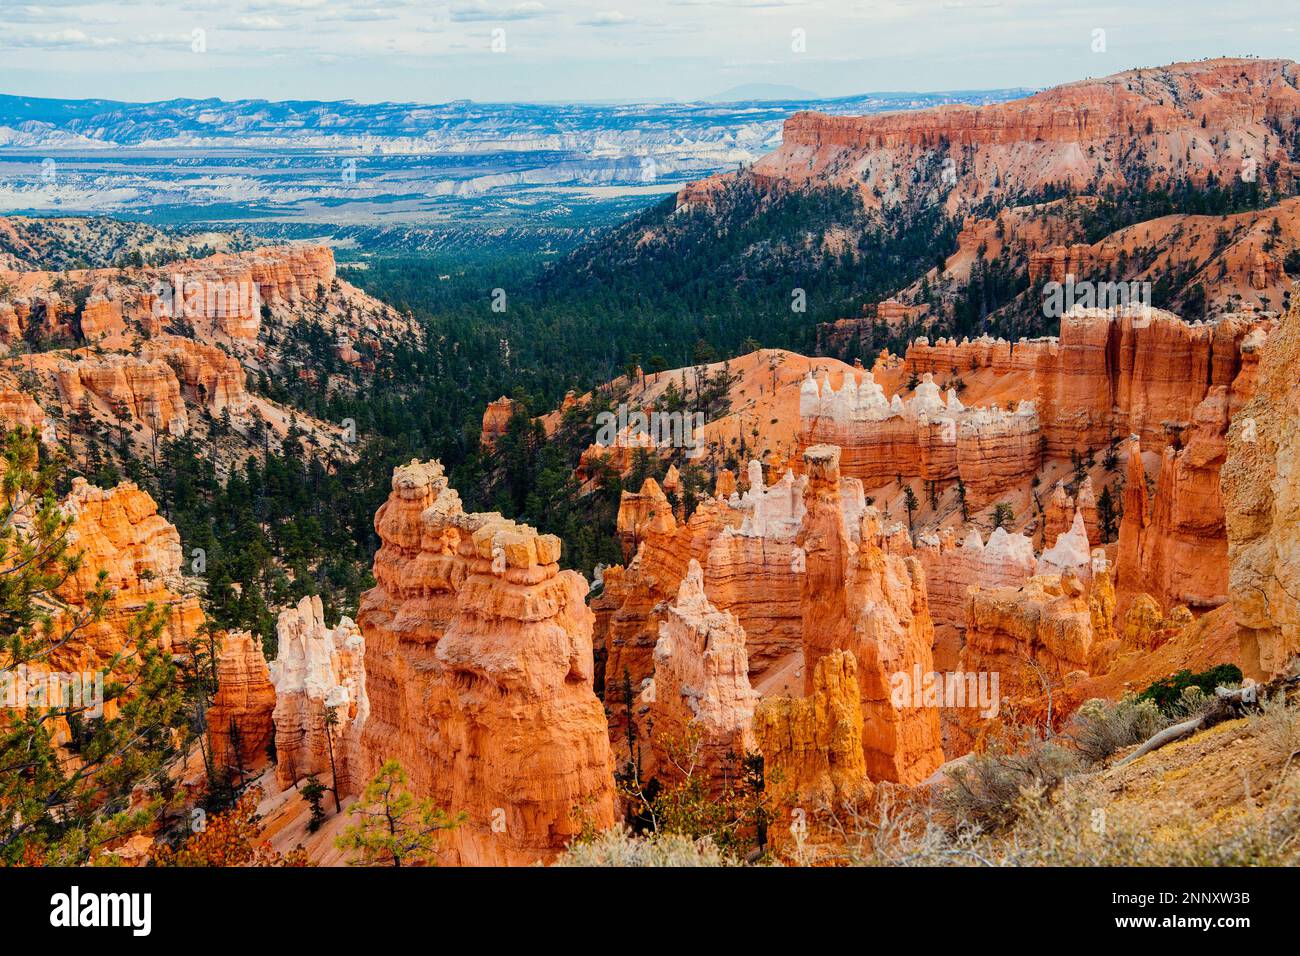 Paysage avec formations rocheuses hoodoo, Bryce Canyon, Utah, États-Unis Banque D'Images